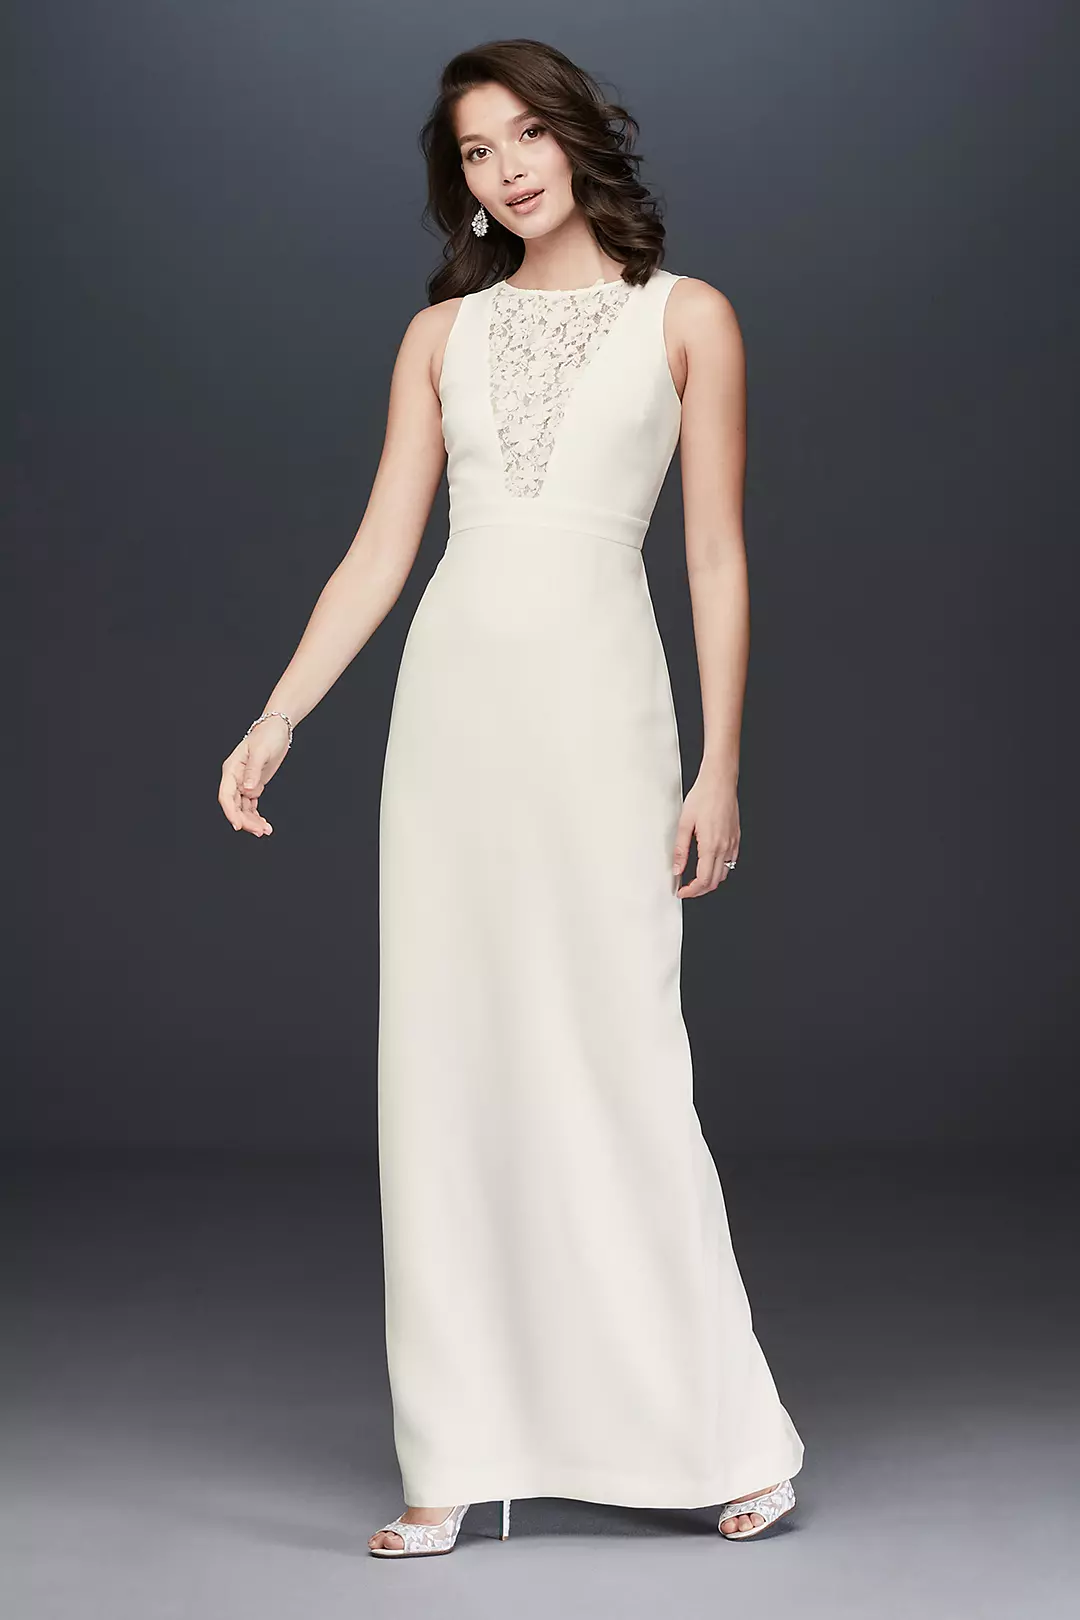 Plunging Illusion Lace Sheath Gown with Flowers Image